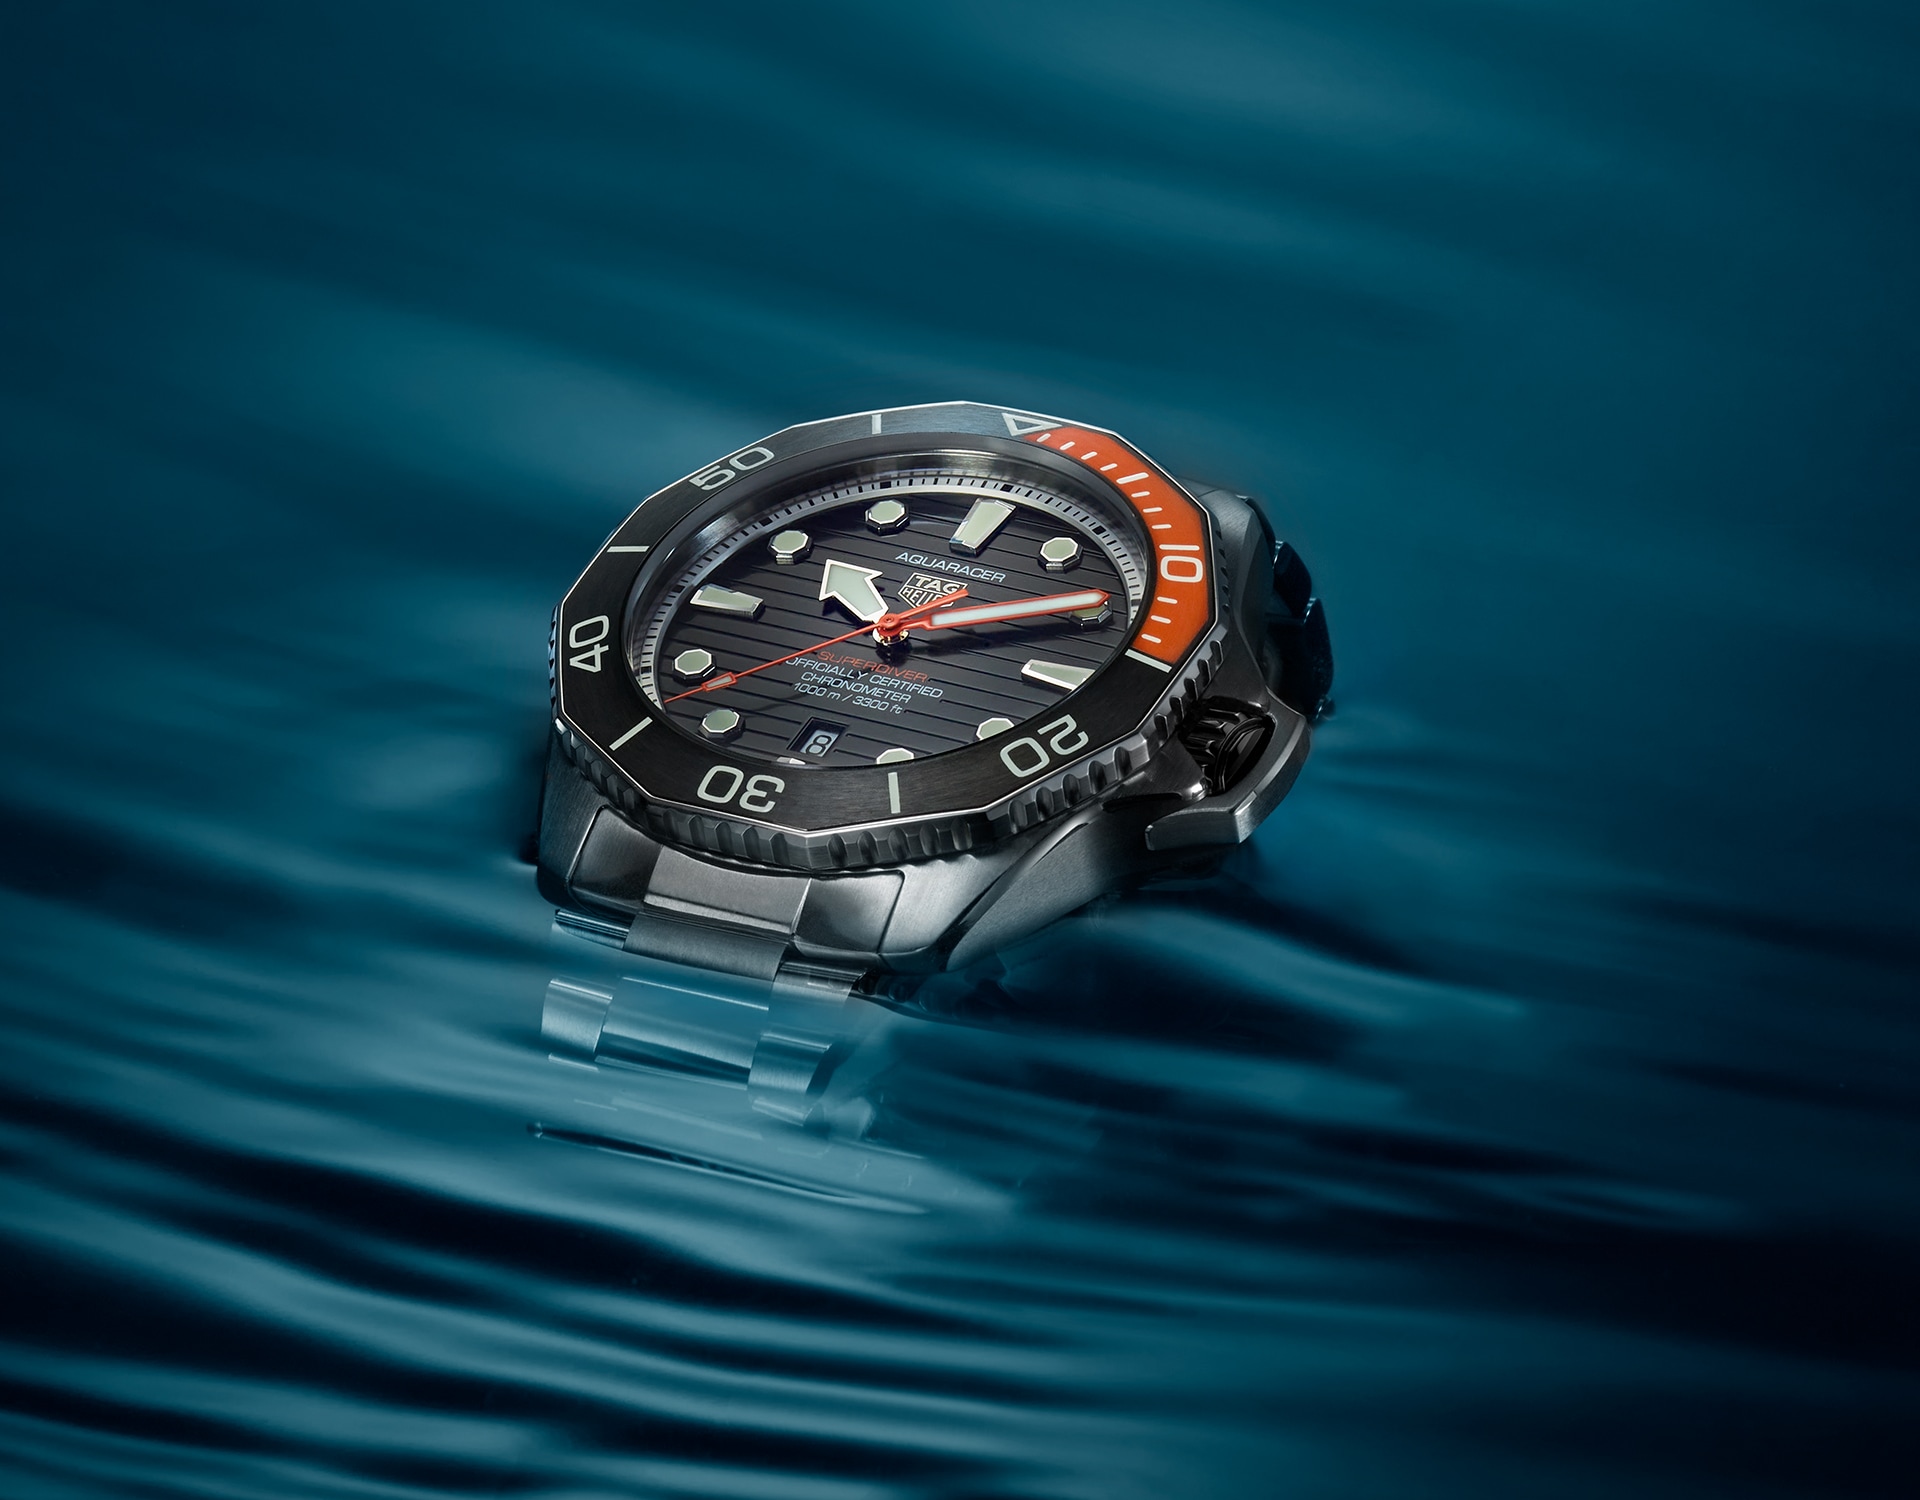 The Session by TAG Heuer "Aquaracer"